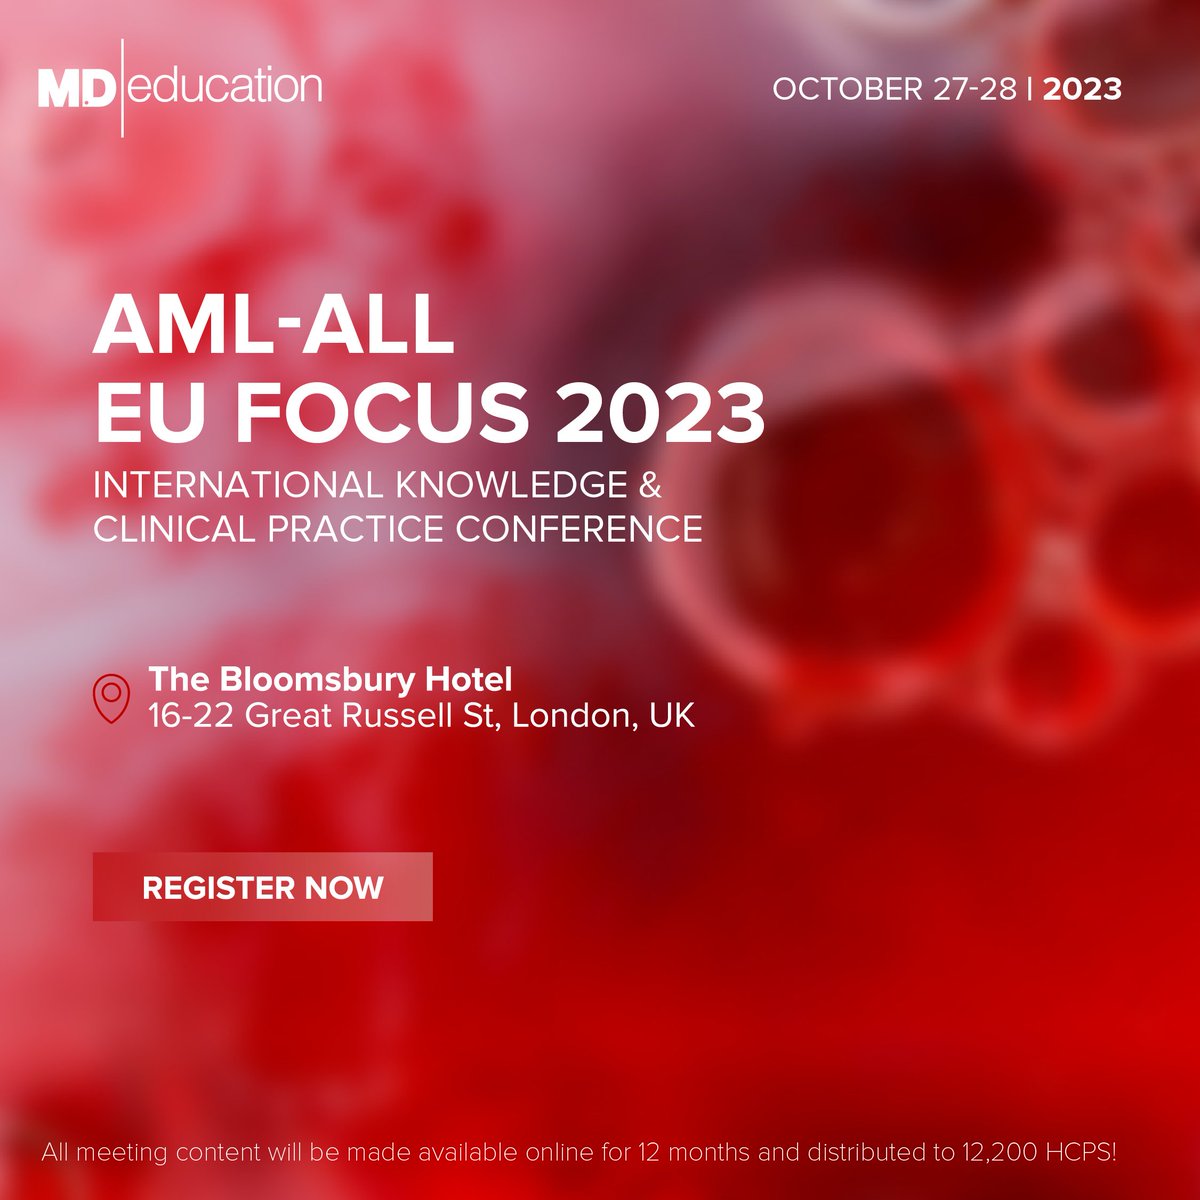 📅 Mark your calendars! AML-ALL EU Focus 2023 is happening at The Bloomsbury Hotel, London, 27-28 Oct! Dive deep into global AML & ALL research, network with experts, & join vibrant discussions. 

🌍✨ 🔗 Register today: aml-alleu2023.md-education.com

#AMLALLEUFocus2023 #MedicalEvent